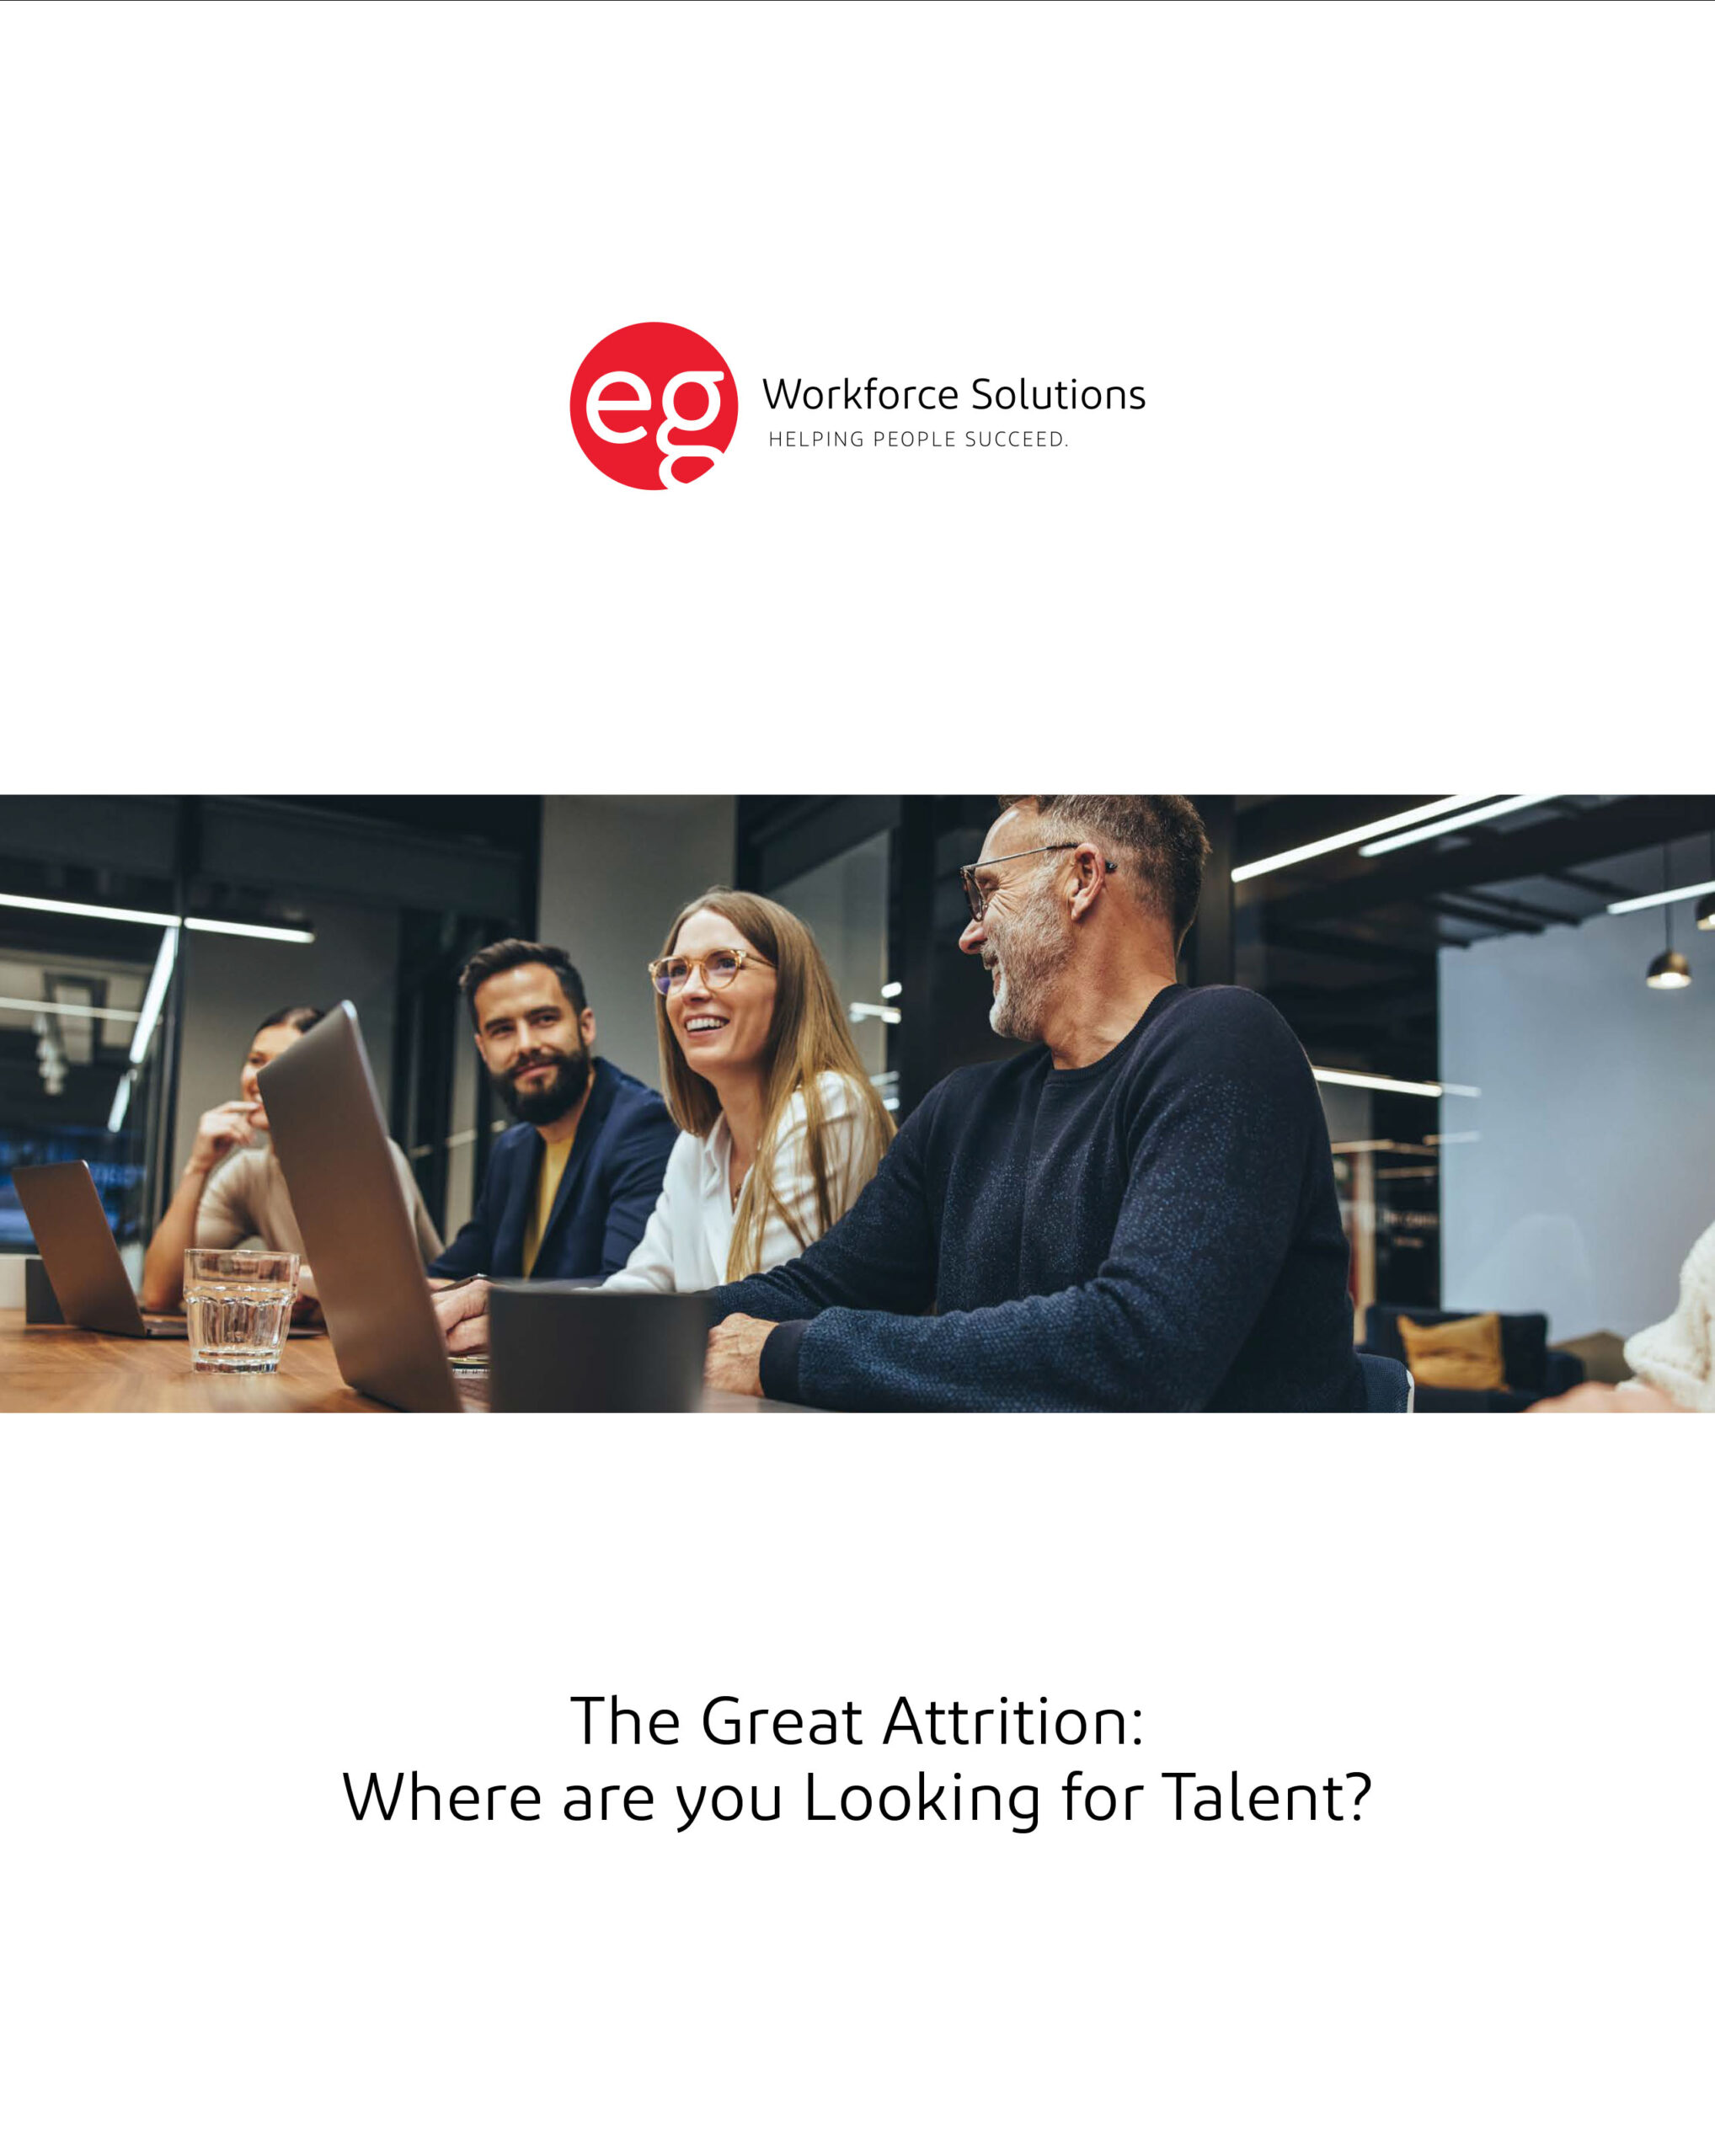 The Great Attrition: Where are you Looking for Talent?